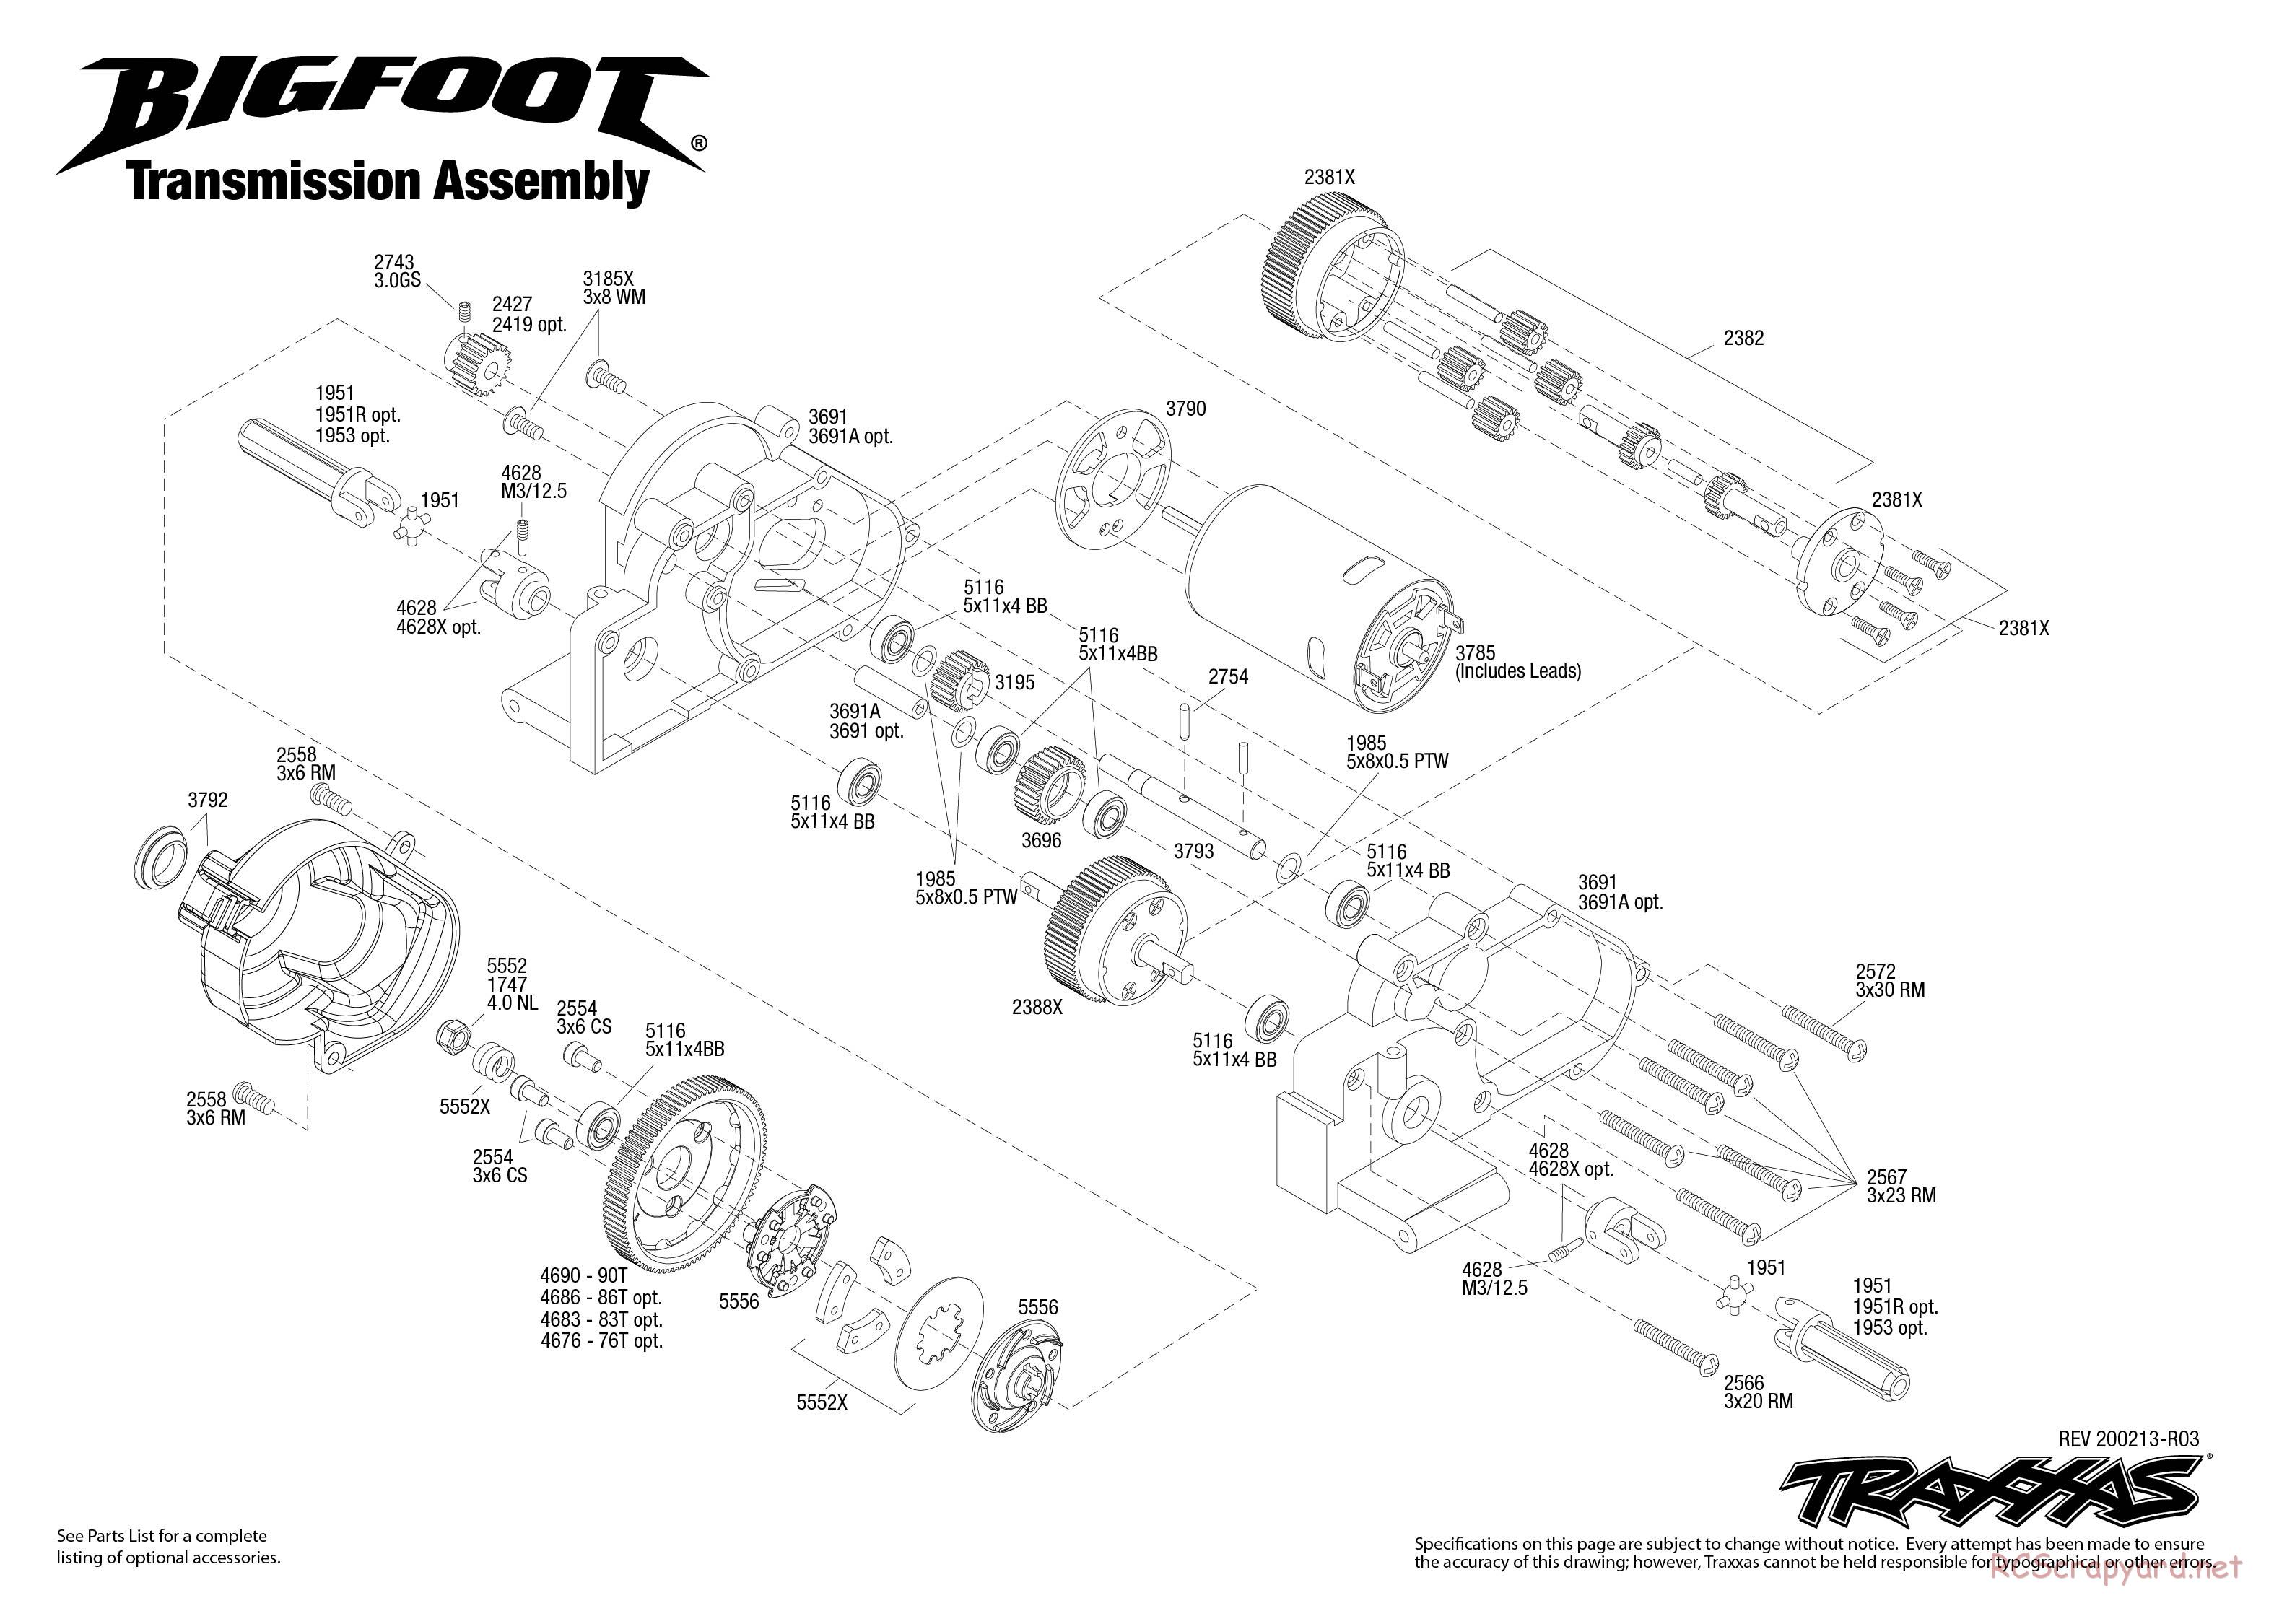 Traxxas - Bigfoot - Exploded Views - Page 4